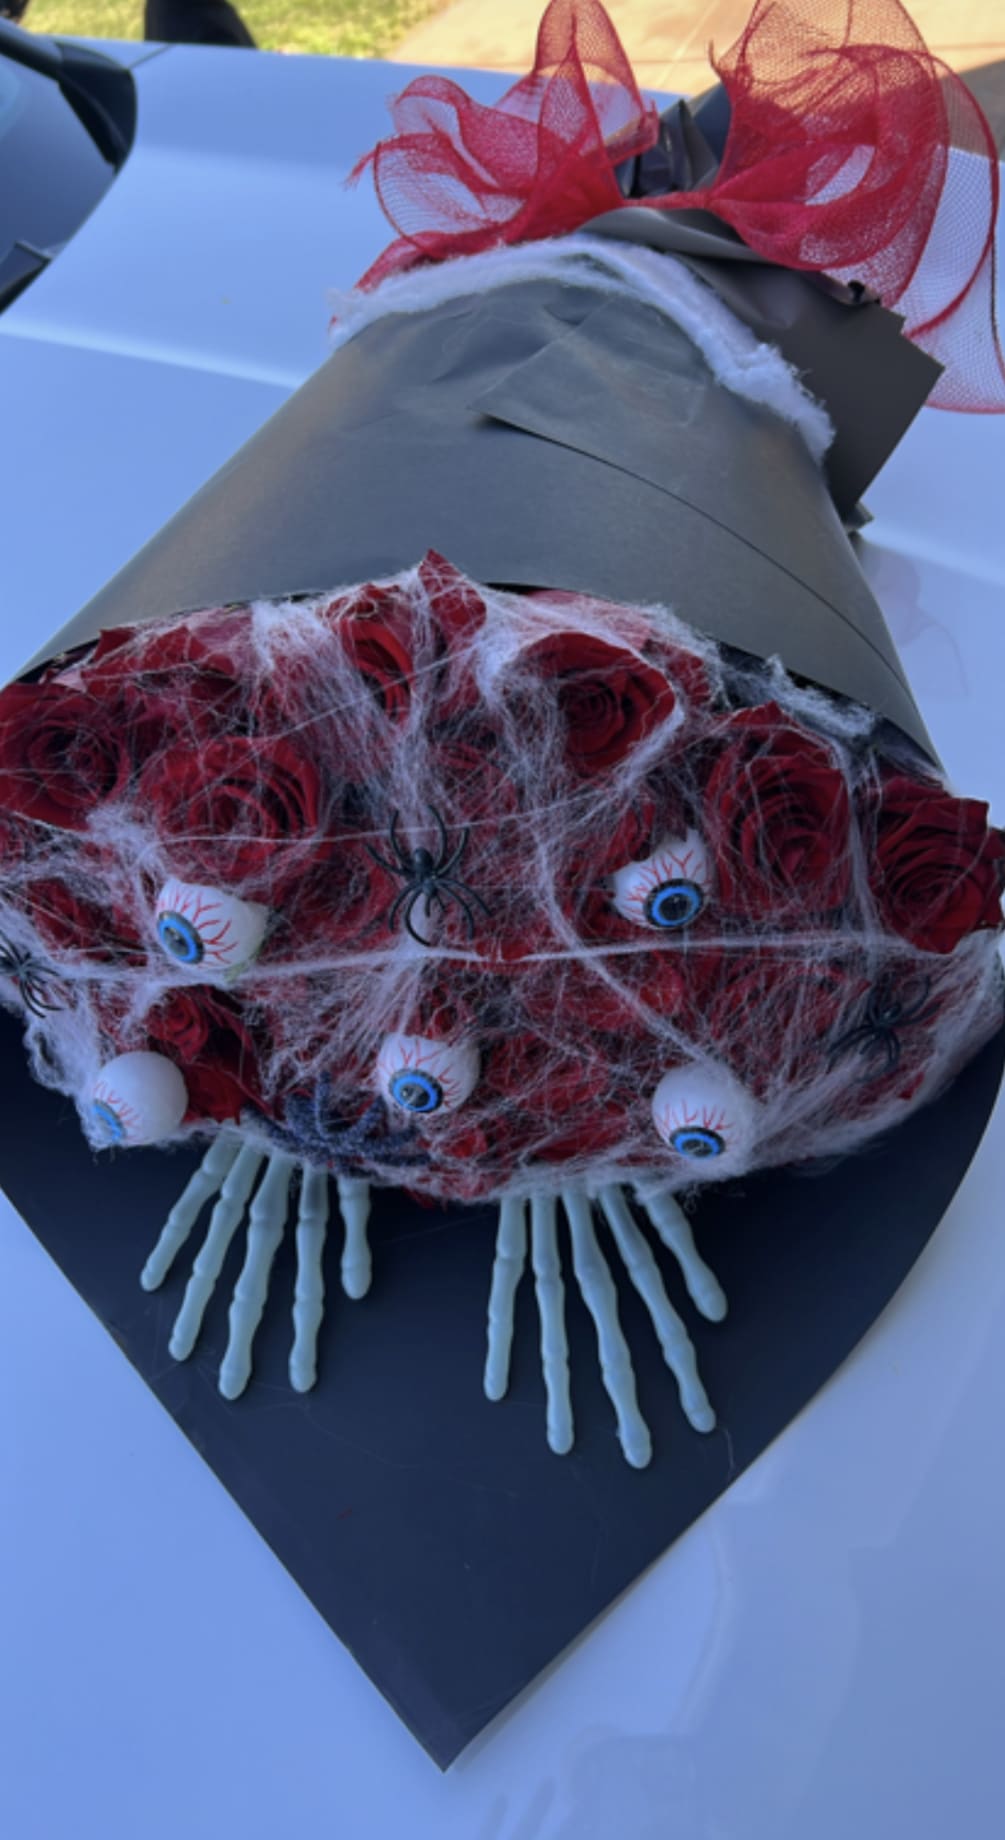 Spooky red roses bouquet comes with 50red roses and spooky skeletons hands